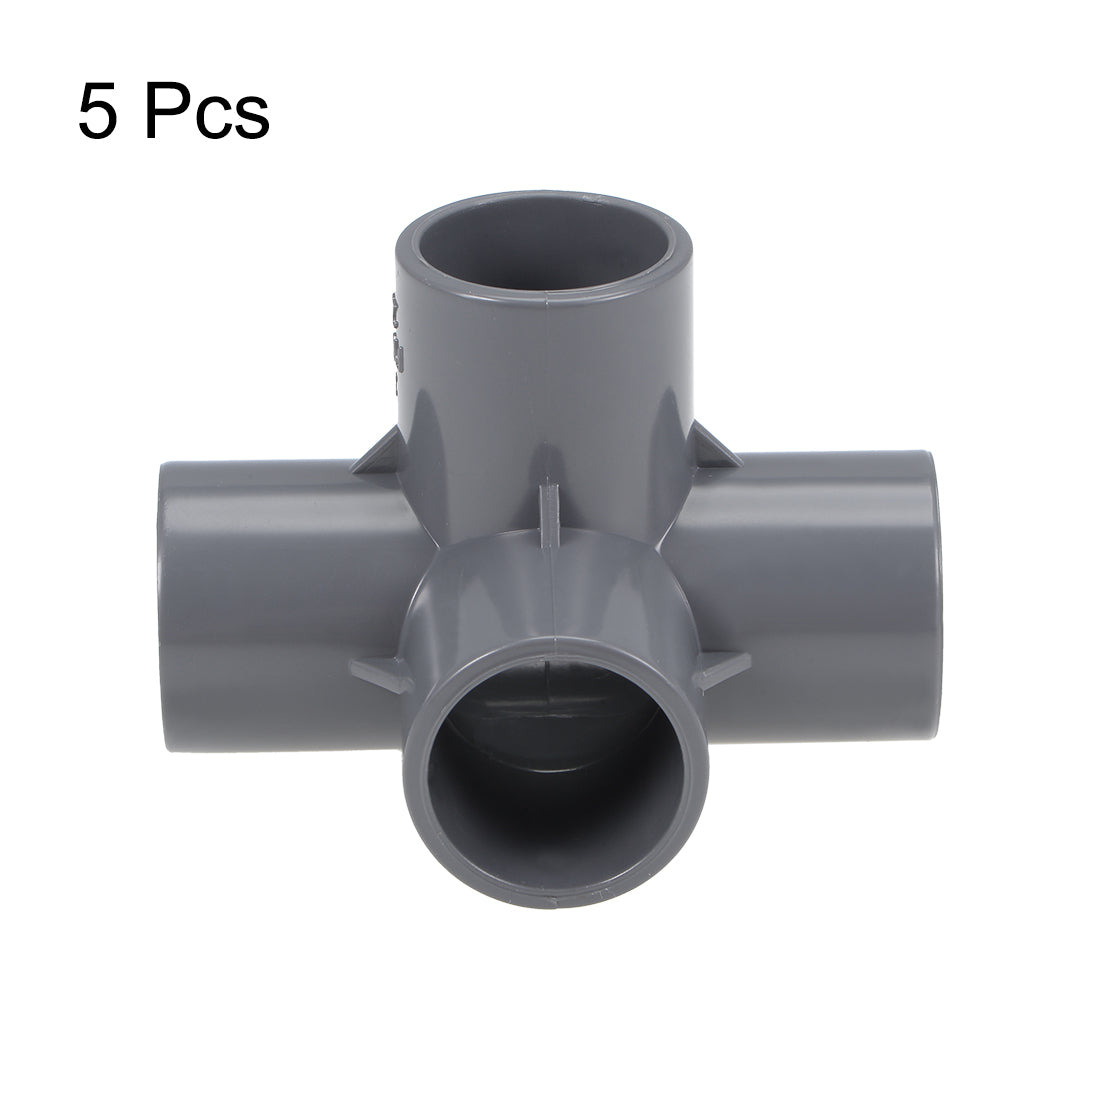 uxcell Uxcell 4 Way 25mm Tee Metric PVC Fitting Elbow - PVC Furniture - PVC Elbow Fittings Gray 5Pcs